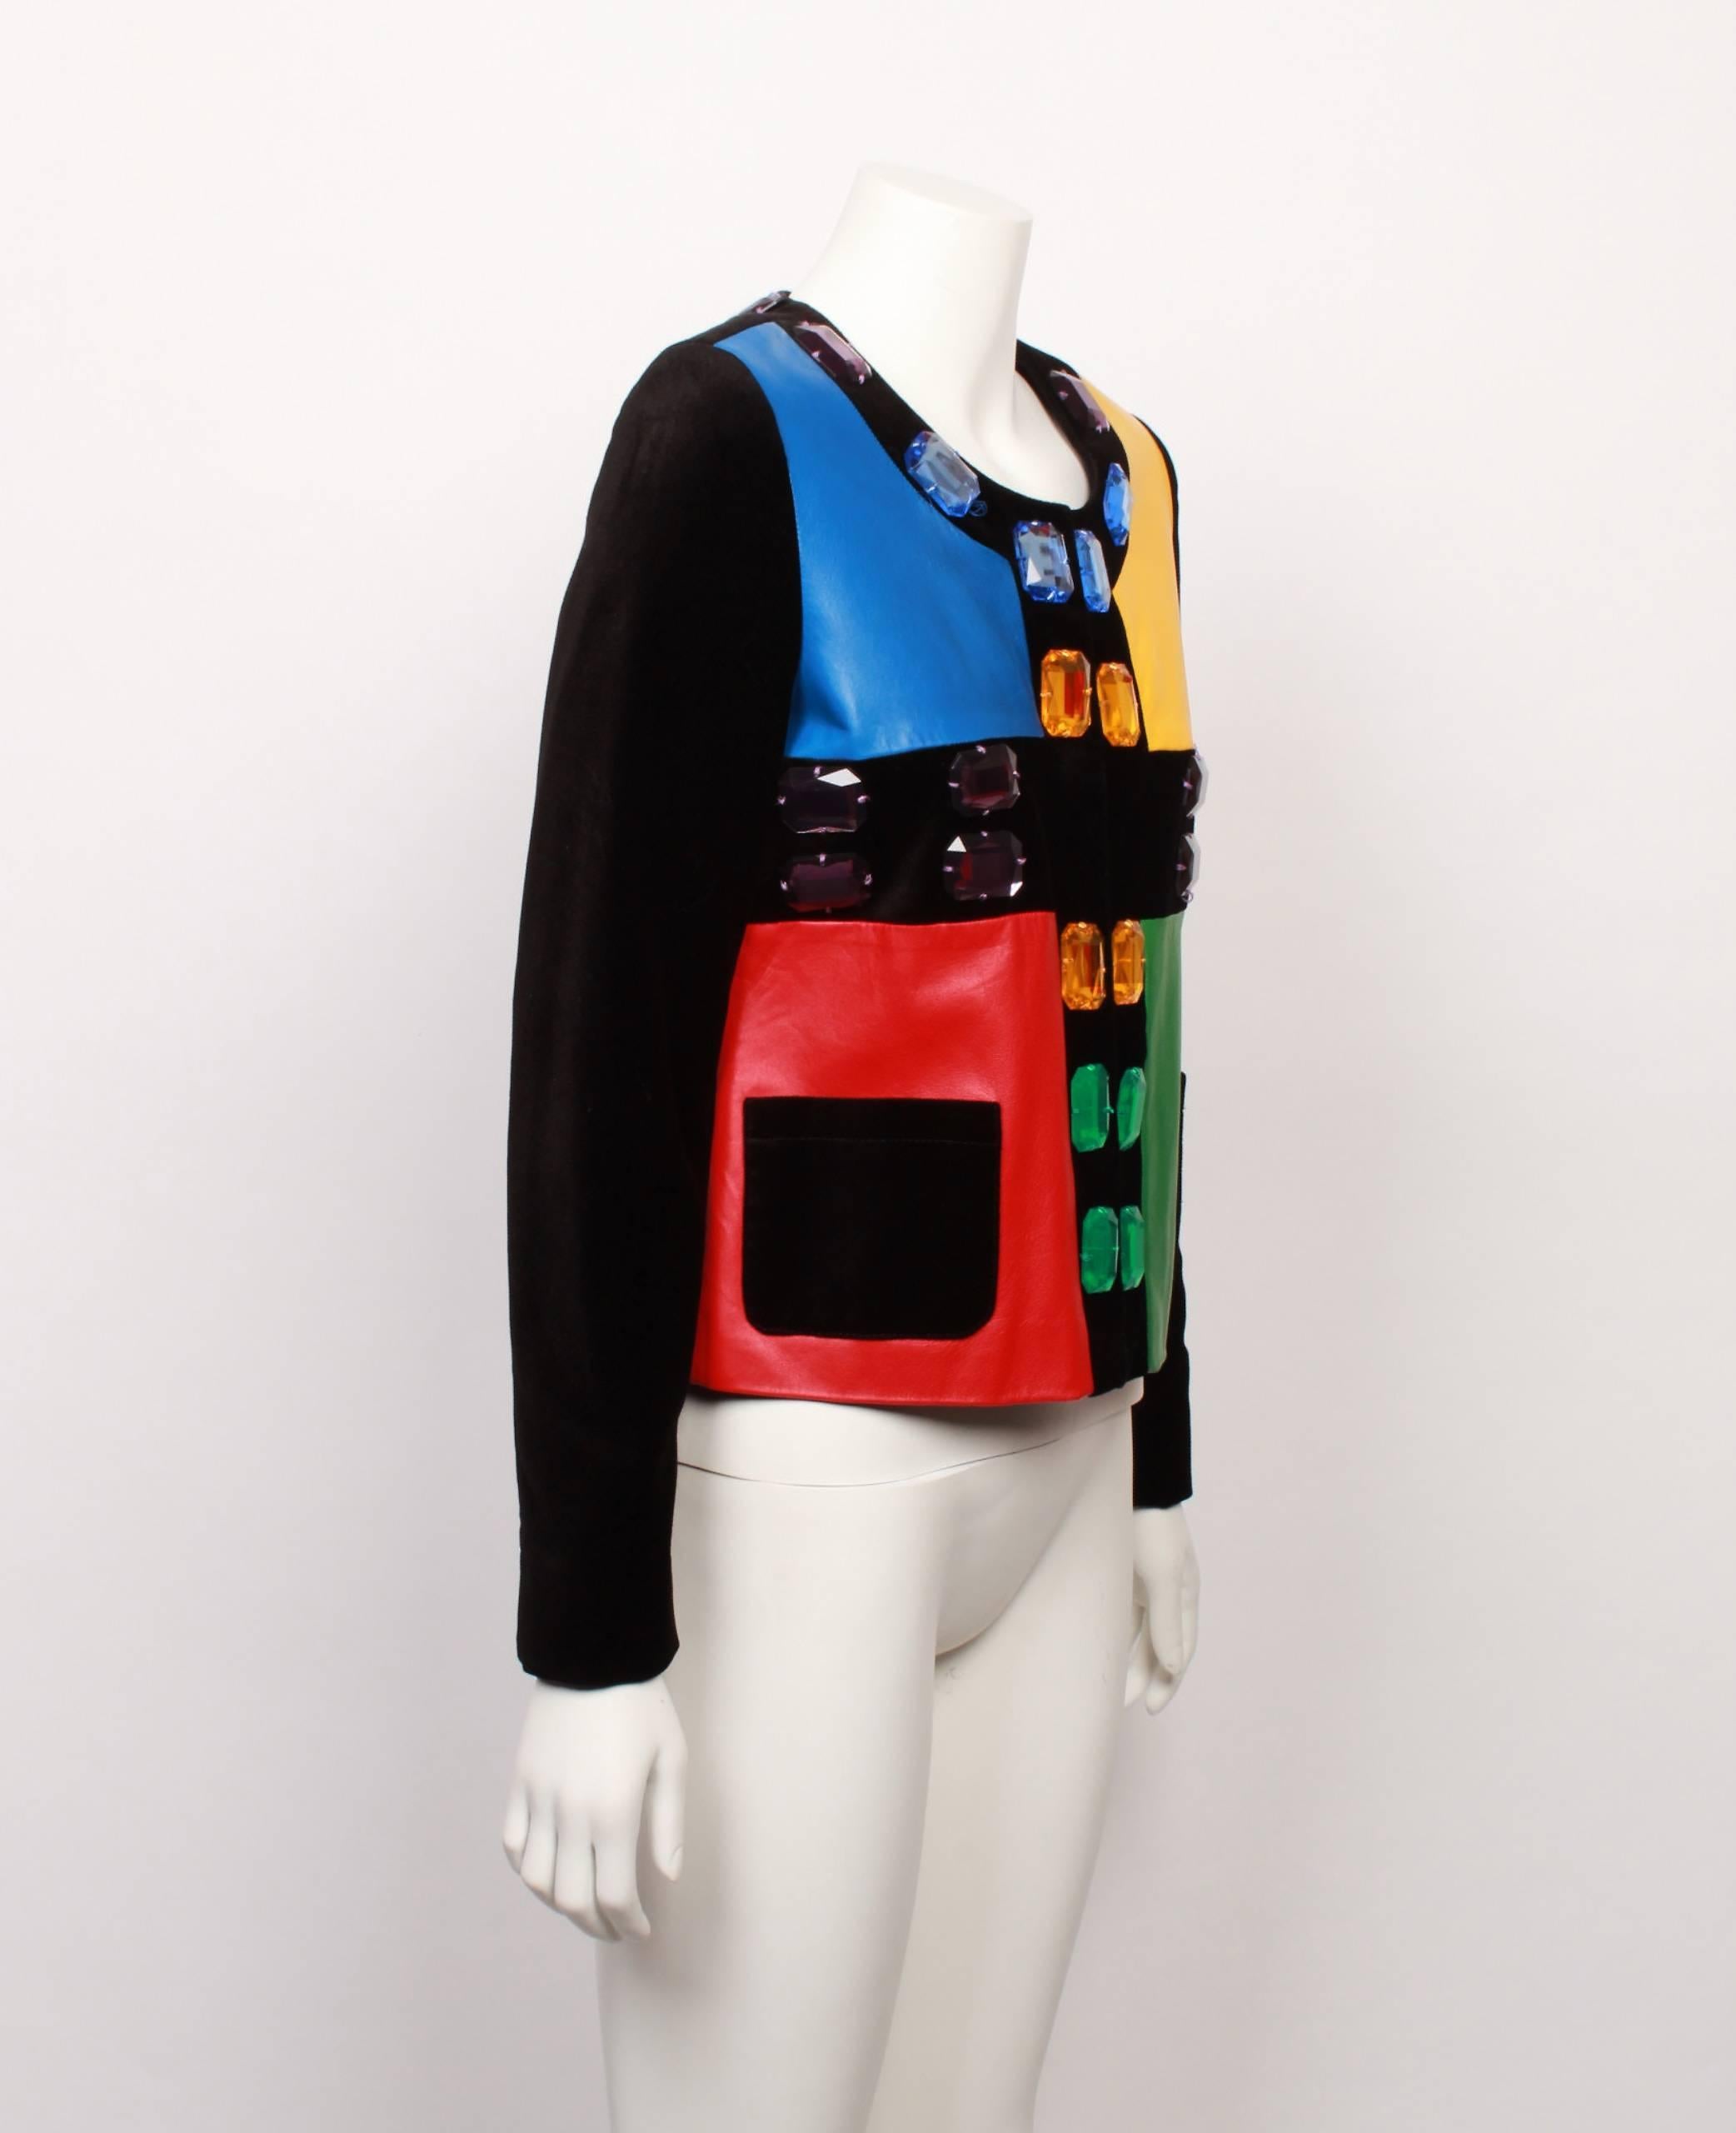 Jean De Castelbajac Mondrian style colour blocked and black velvet jacket with large emerald cut jewels in blue, amber amethyst and green. The front features four square panels of leather in primary hues of red, blue, yellow and green - With